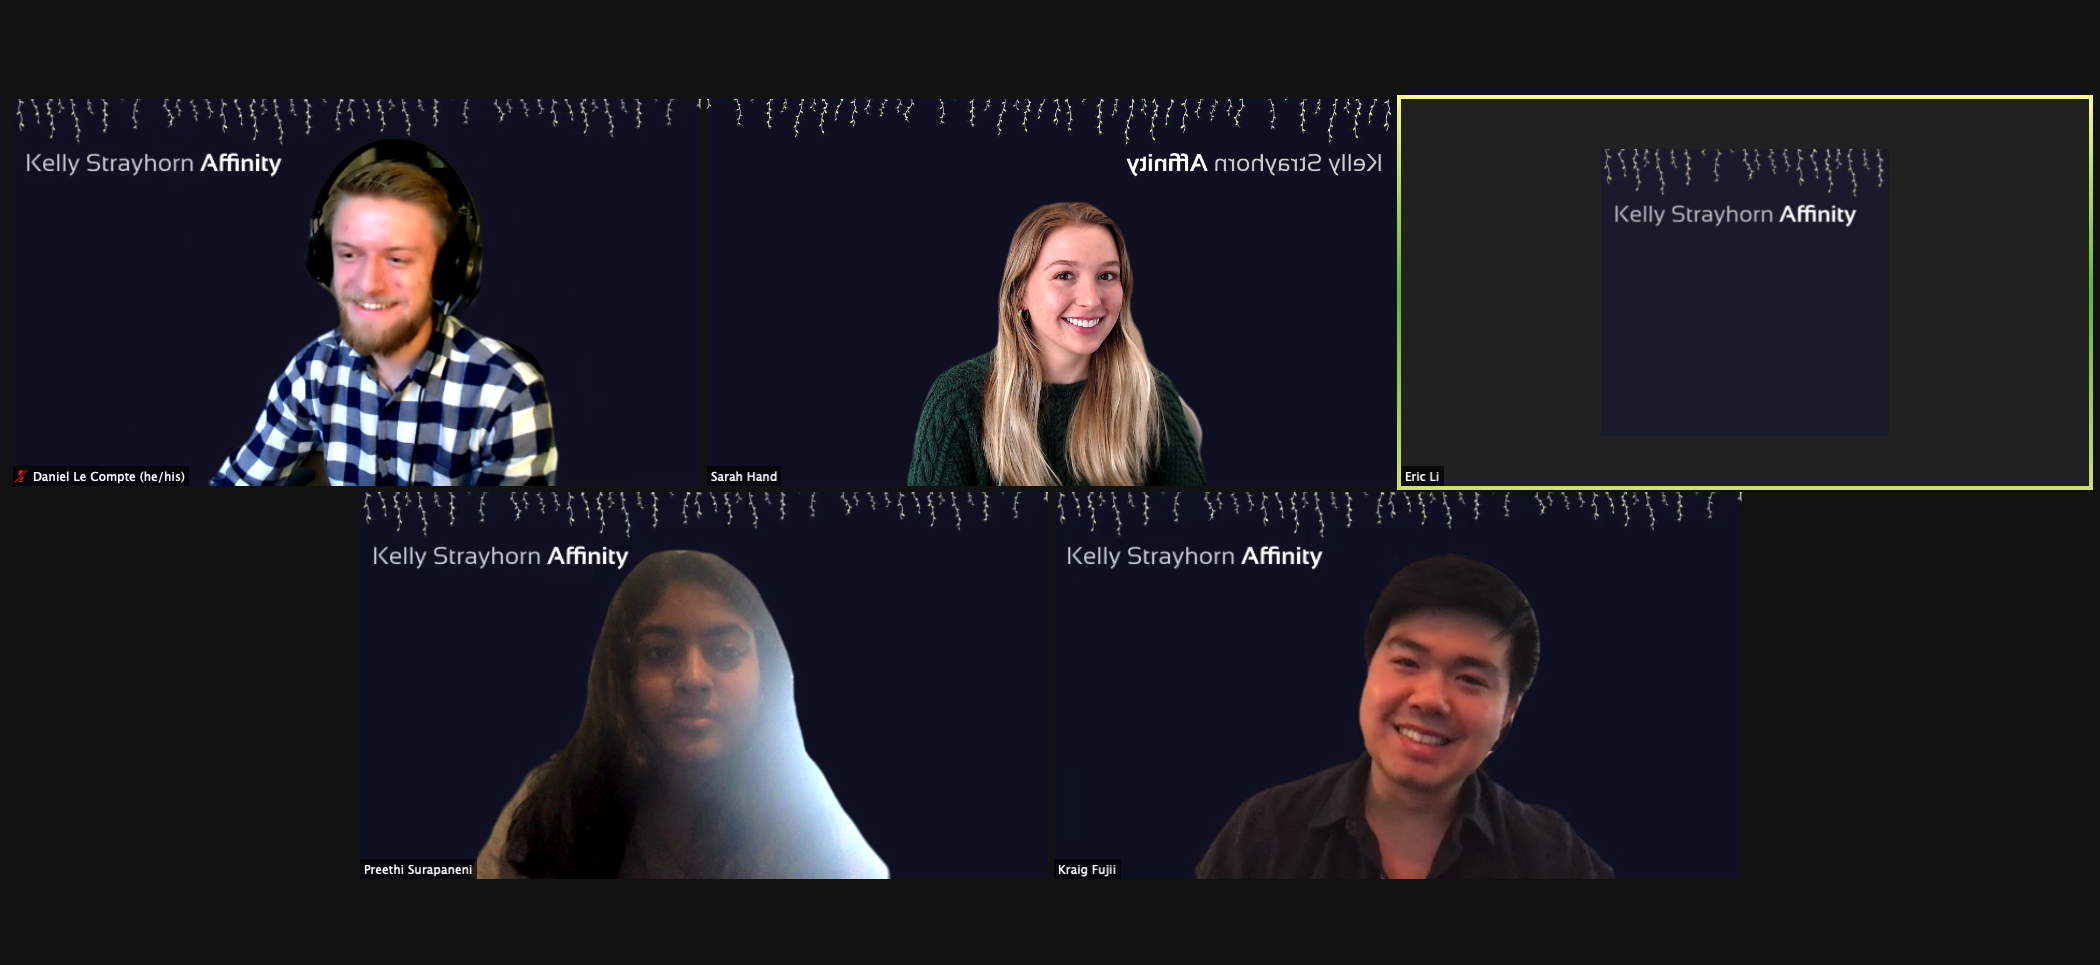 Our team on Zoom for our poster session with our matching backgrounds